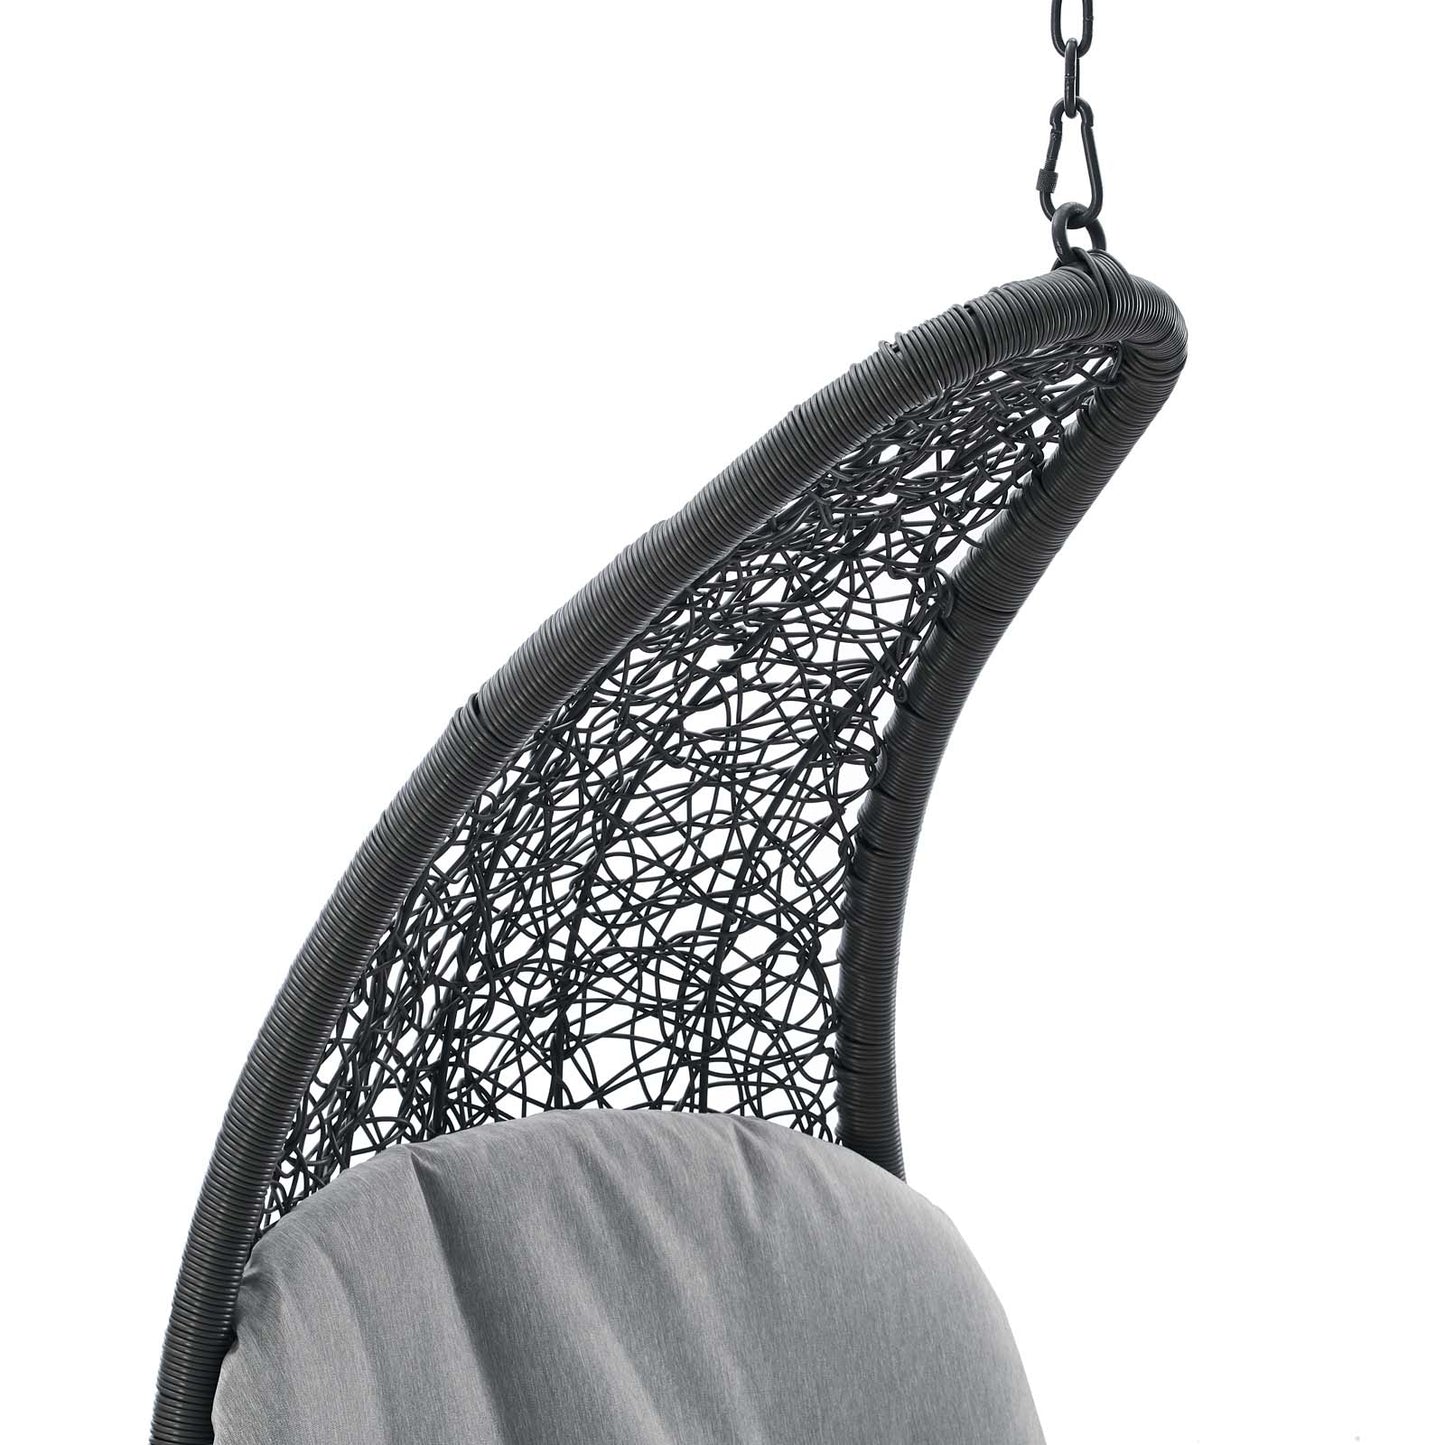 Landscape Hanging Chaise Lounge Outdoor Patio Swing Chair Light Gray Gray EEI-4589-LGR-GRY